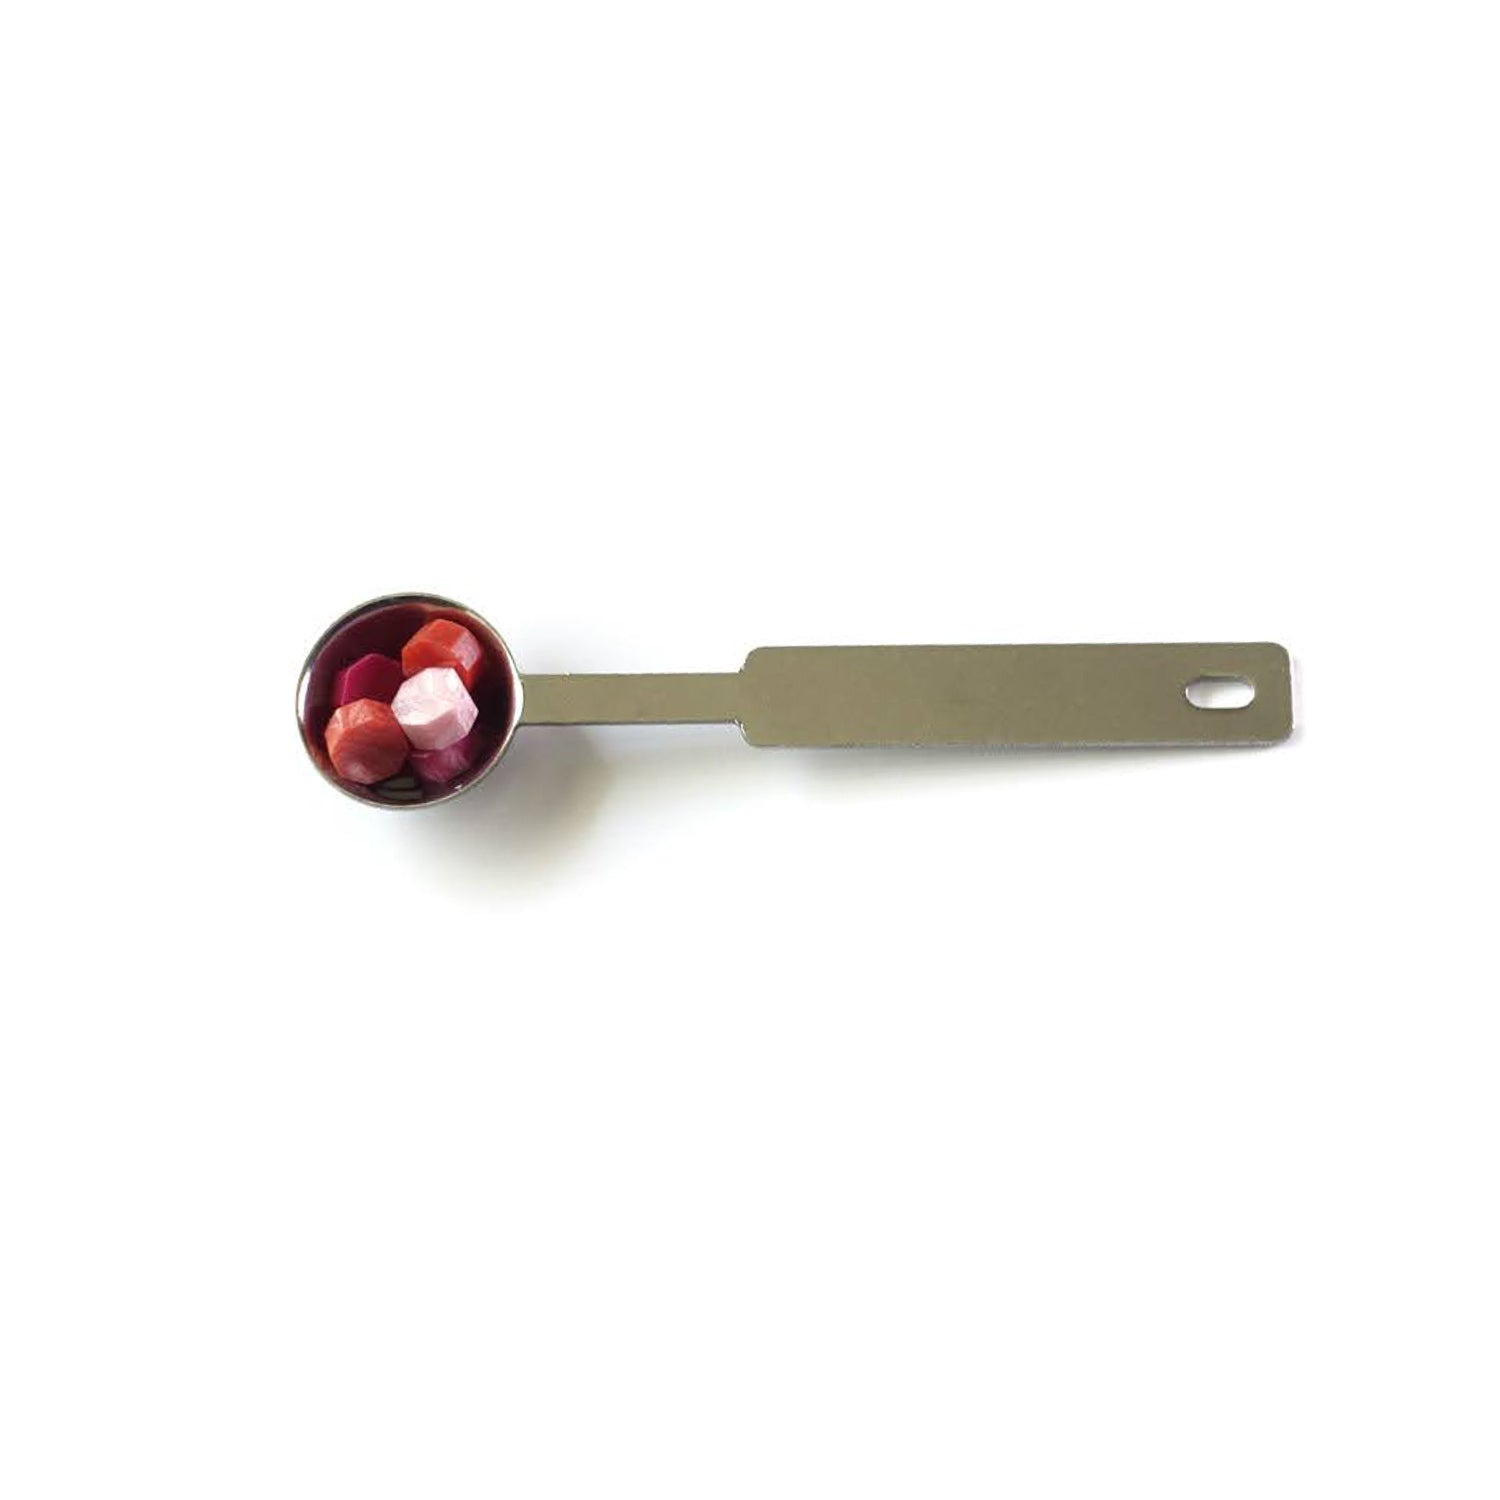 Small standard metal spoon for melting wax seals